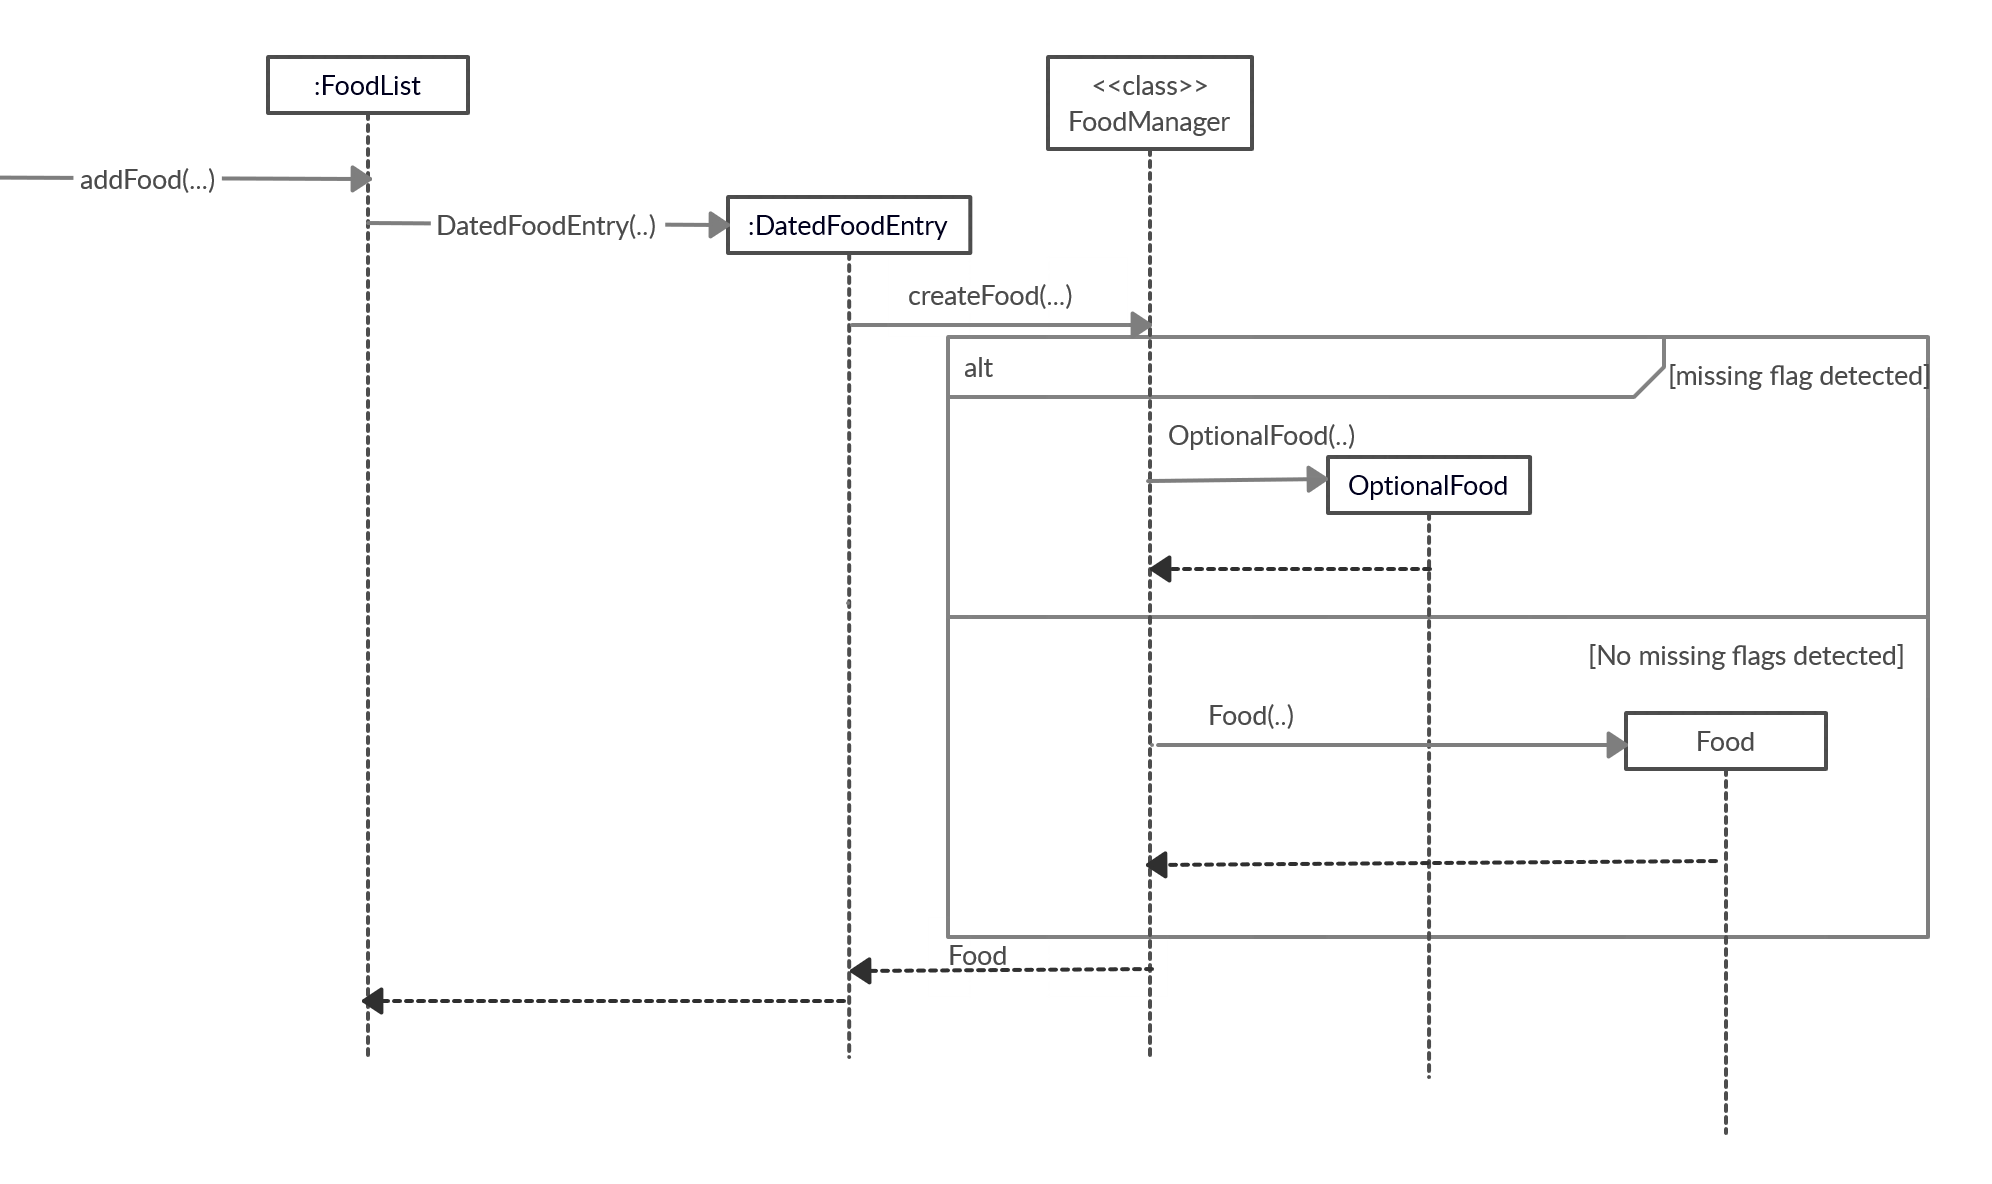 Sequence diagram of Food creation